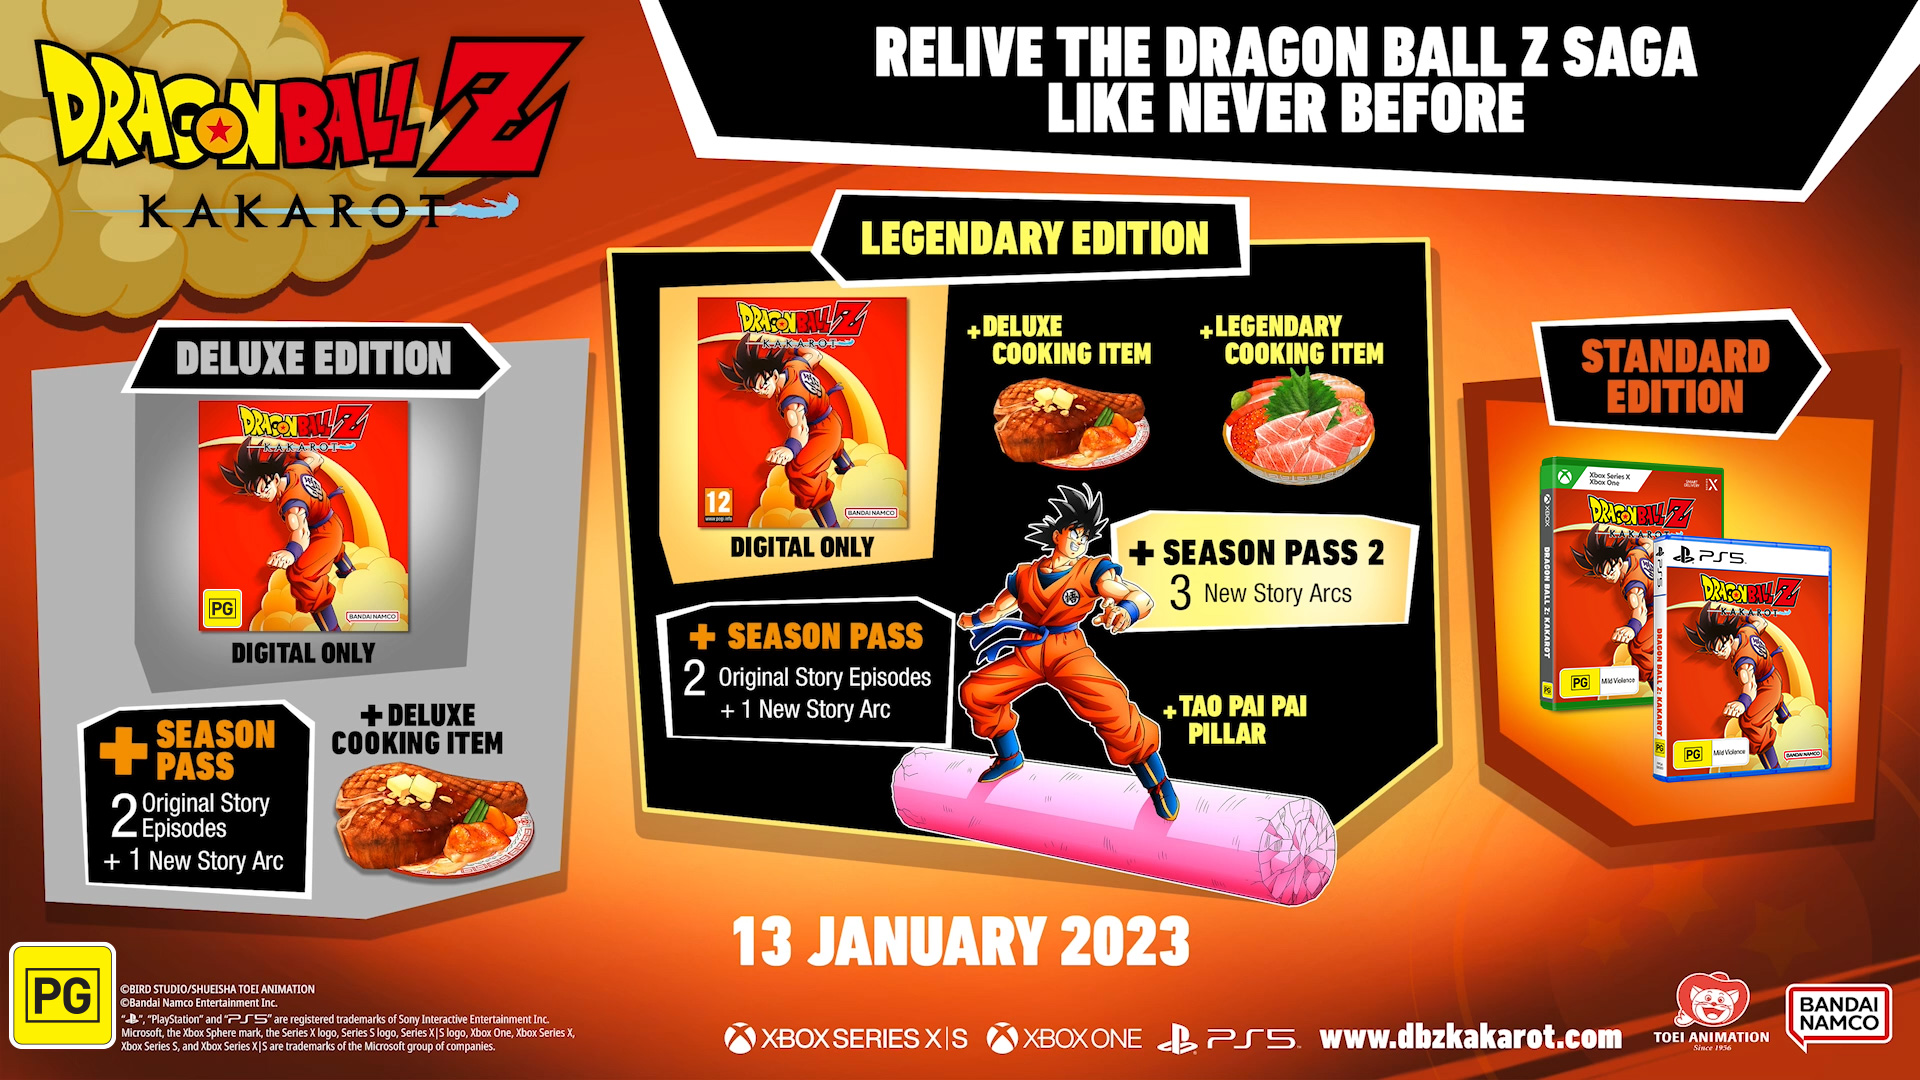 Dragon Ball Z Kakarot Set To Release On PlayStation 5 & Xbox Series X|S January 13th 2023 – Physical Pre-Orders Are Now Open